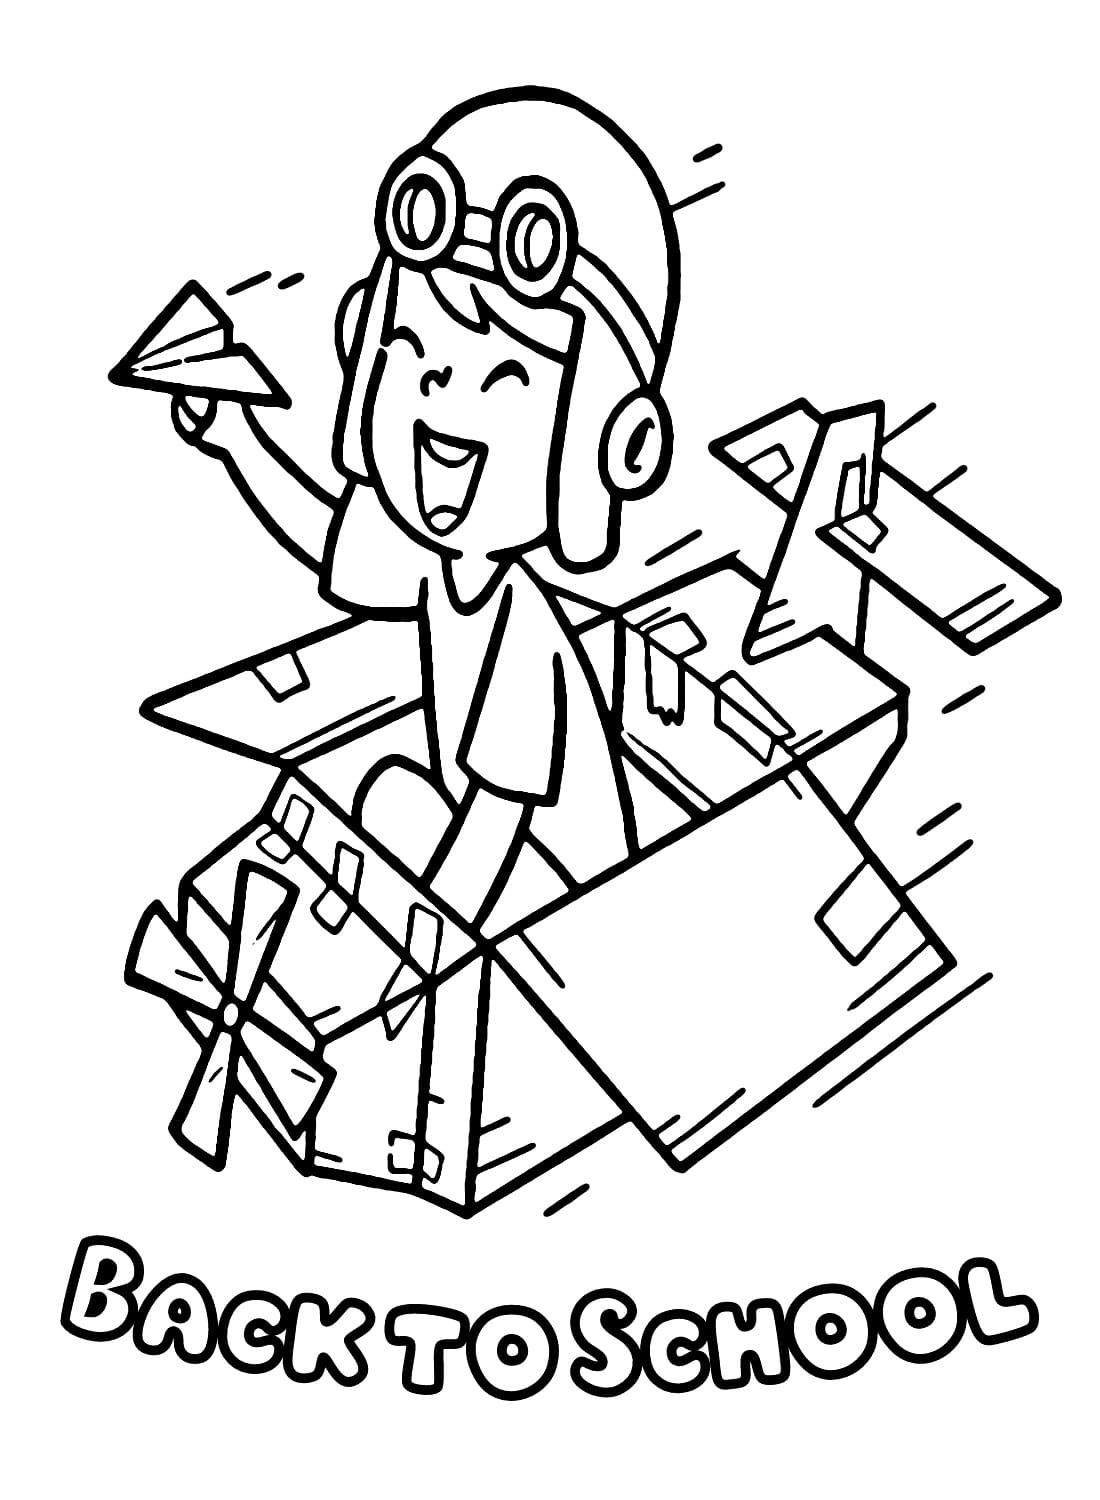 Back to School Printable coloring page - Download, Print or Color ...